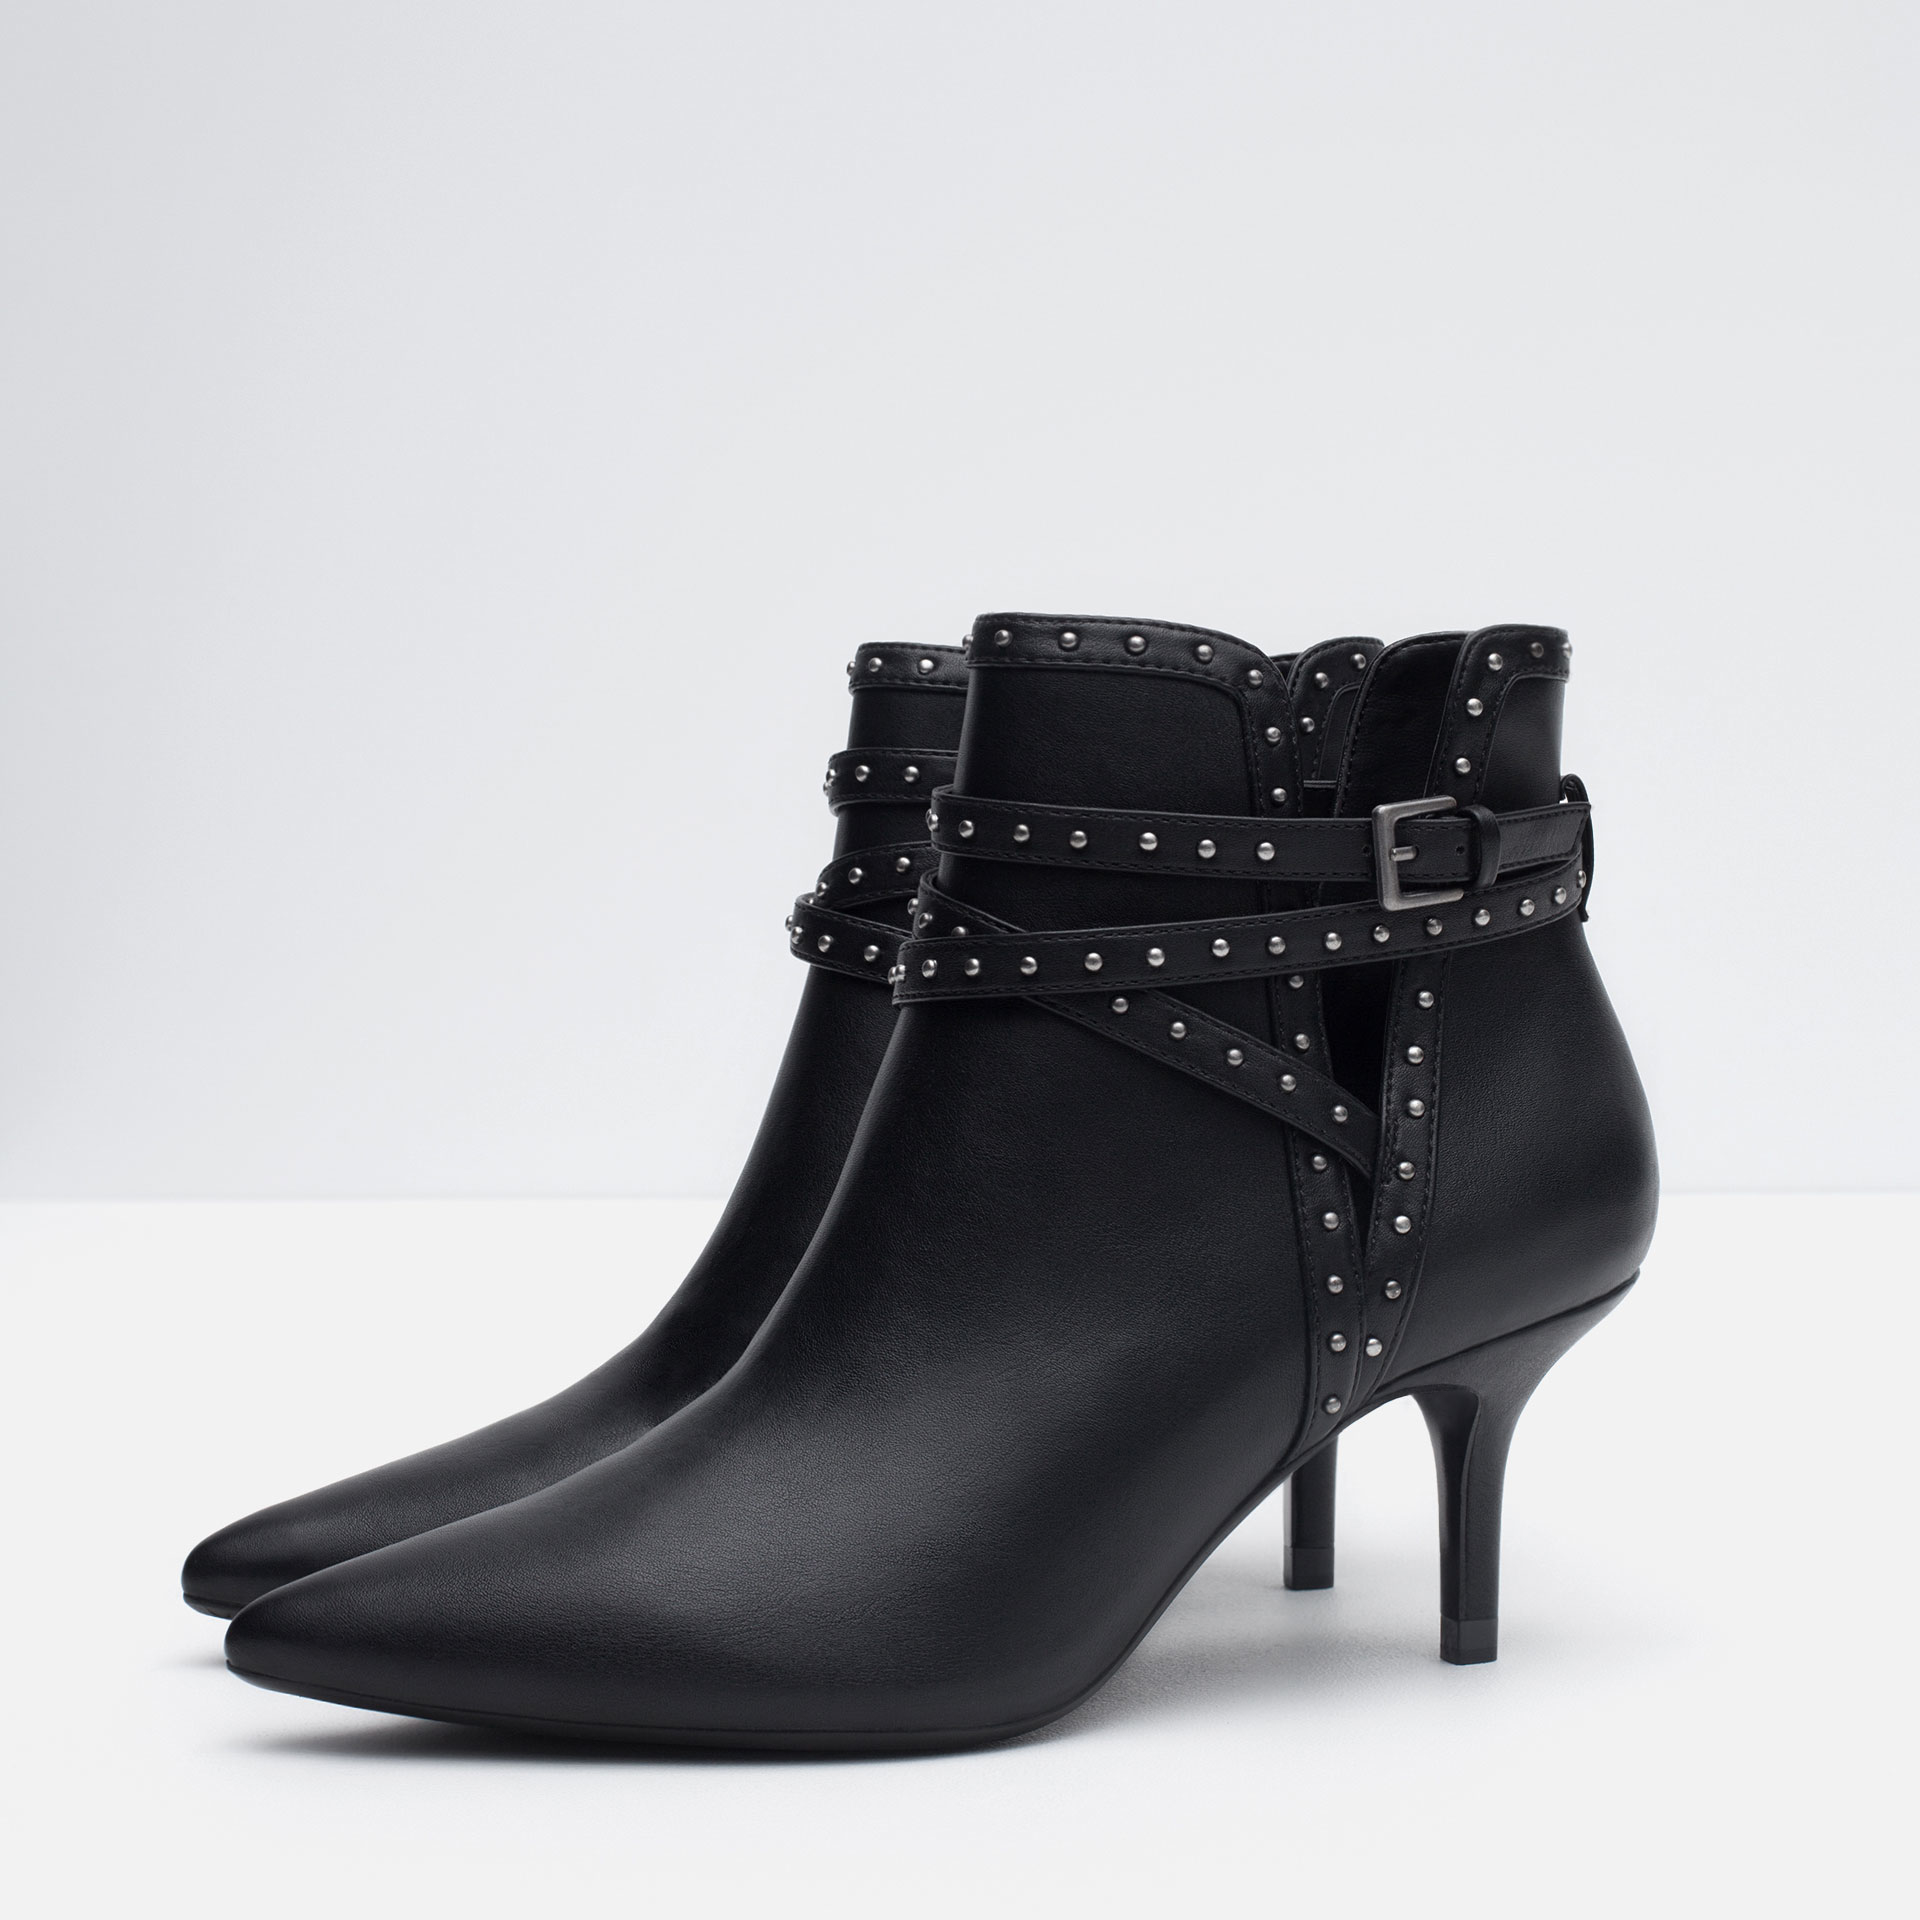 Zara High Heel Studded Ankle Boots in Black | Lyst